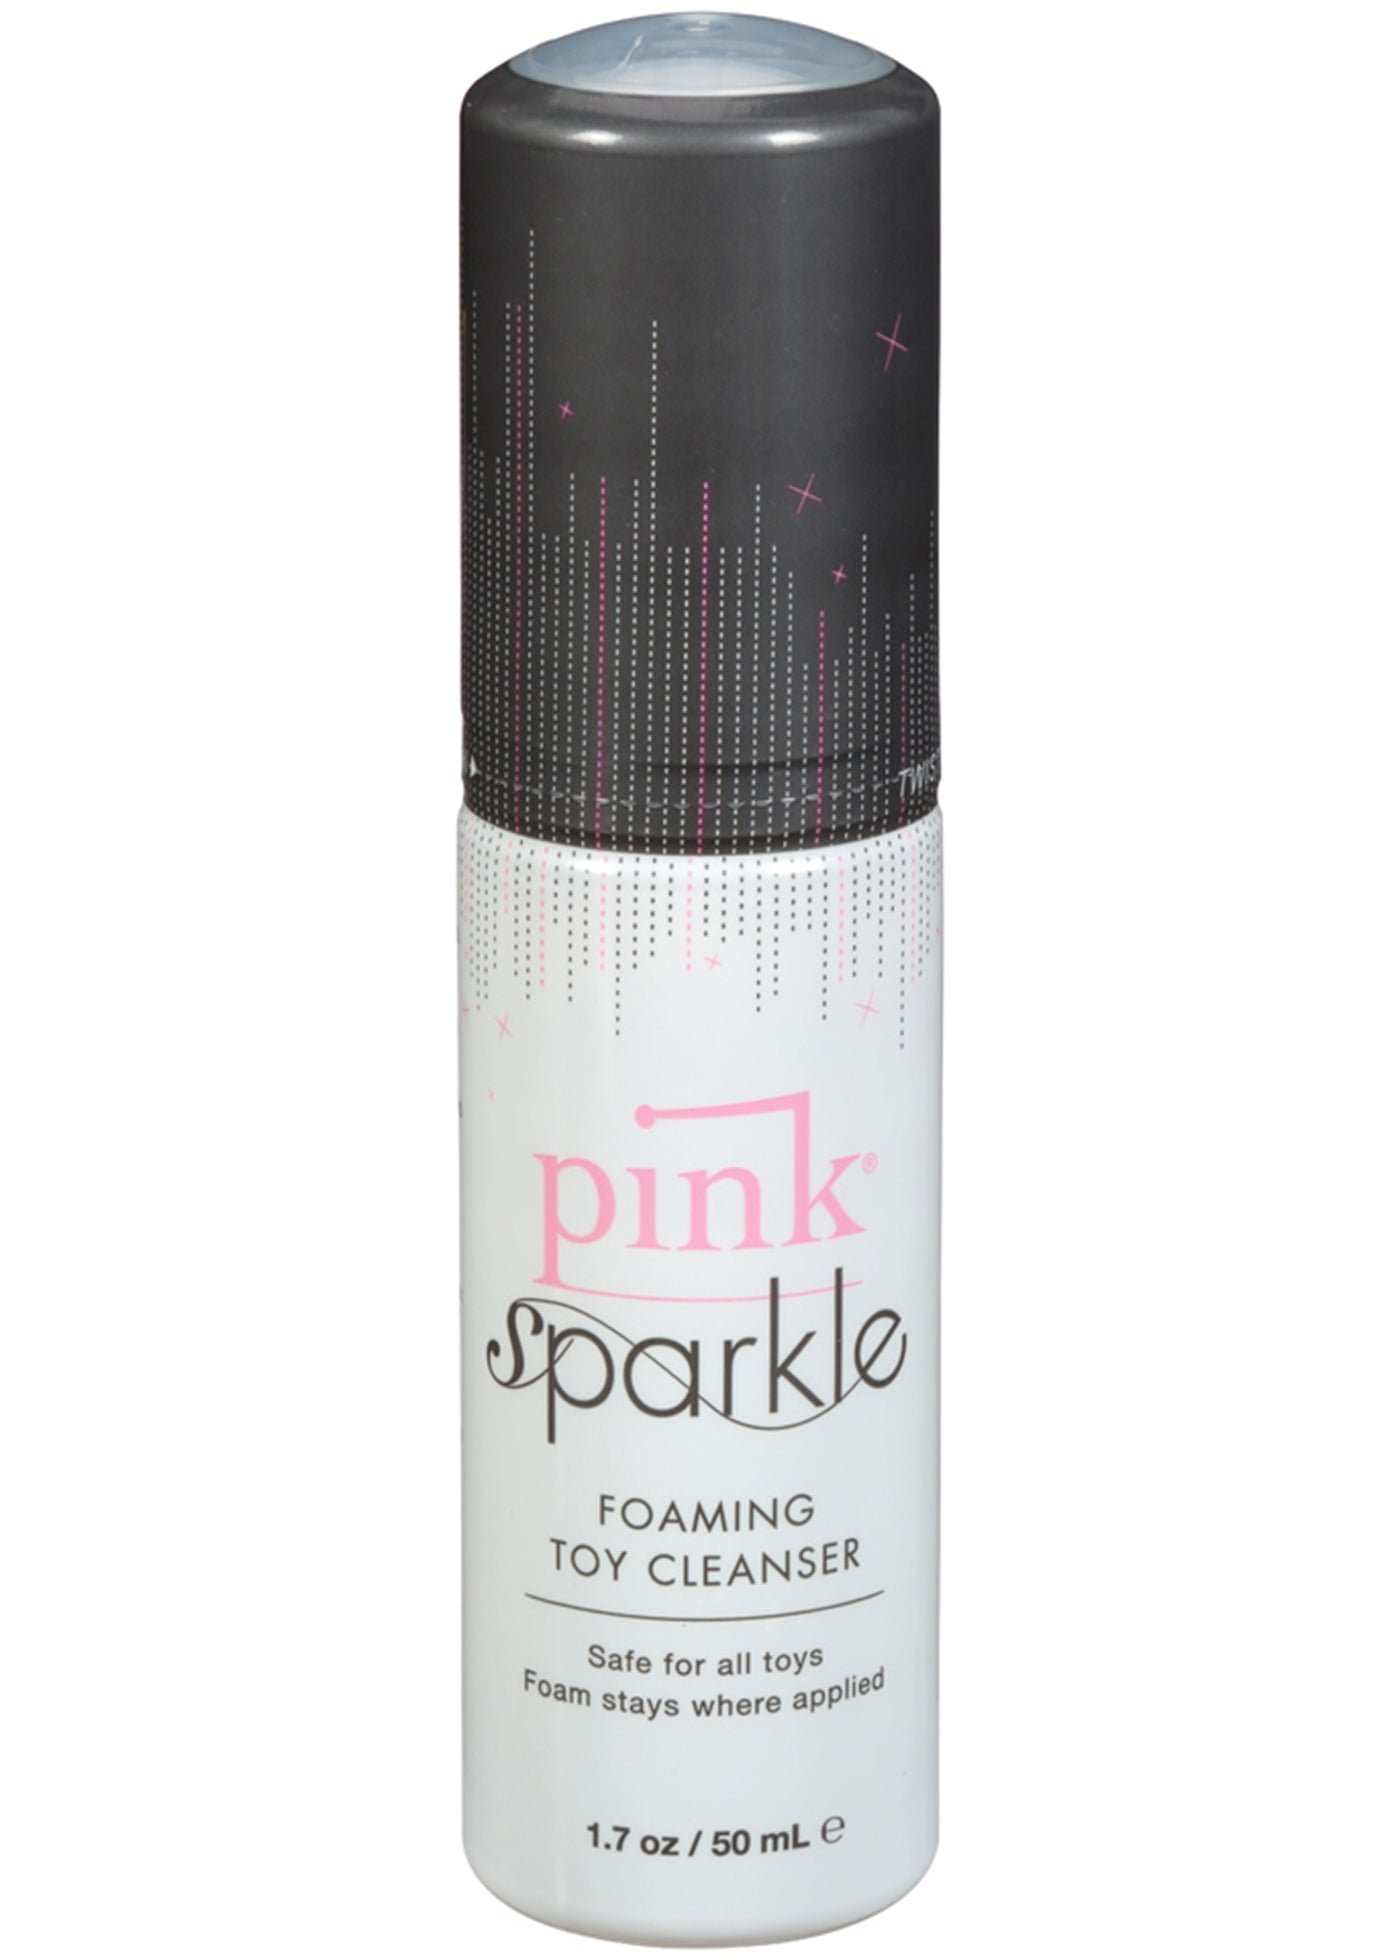 Pink Sparkle Foaming Toy Cleaner